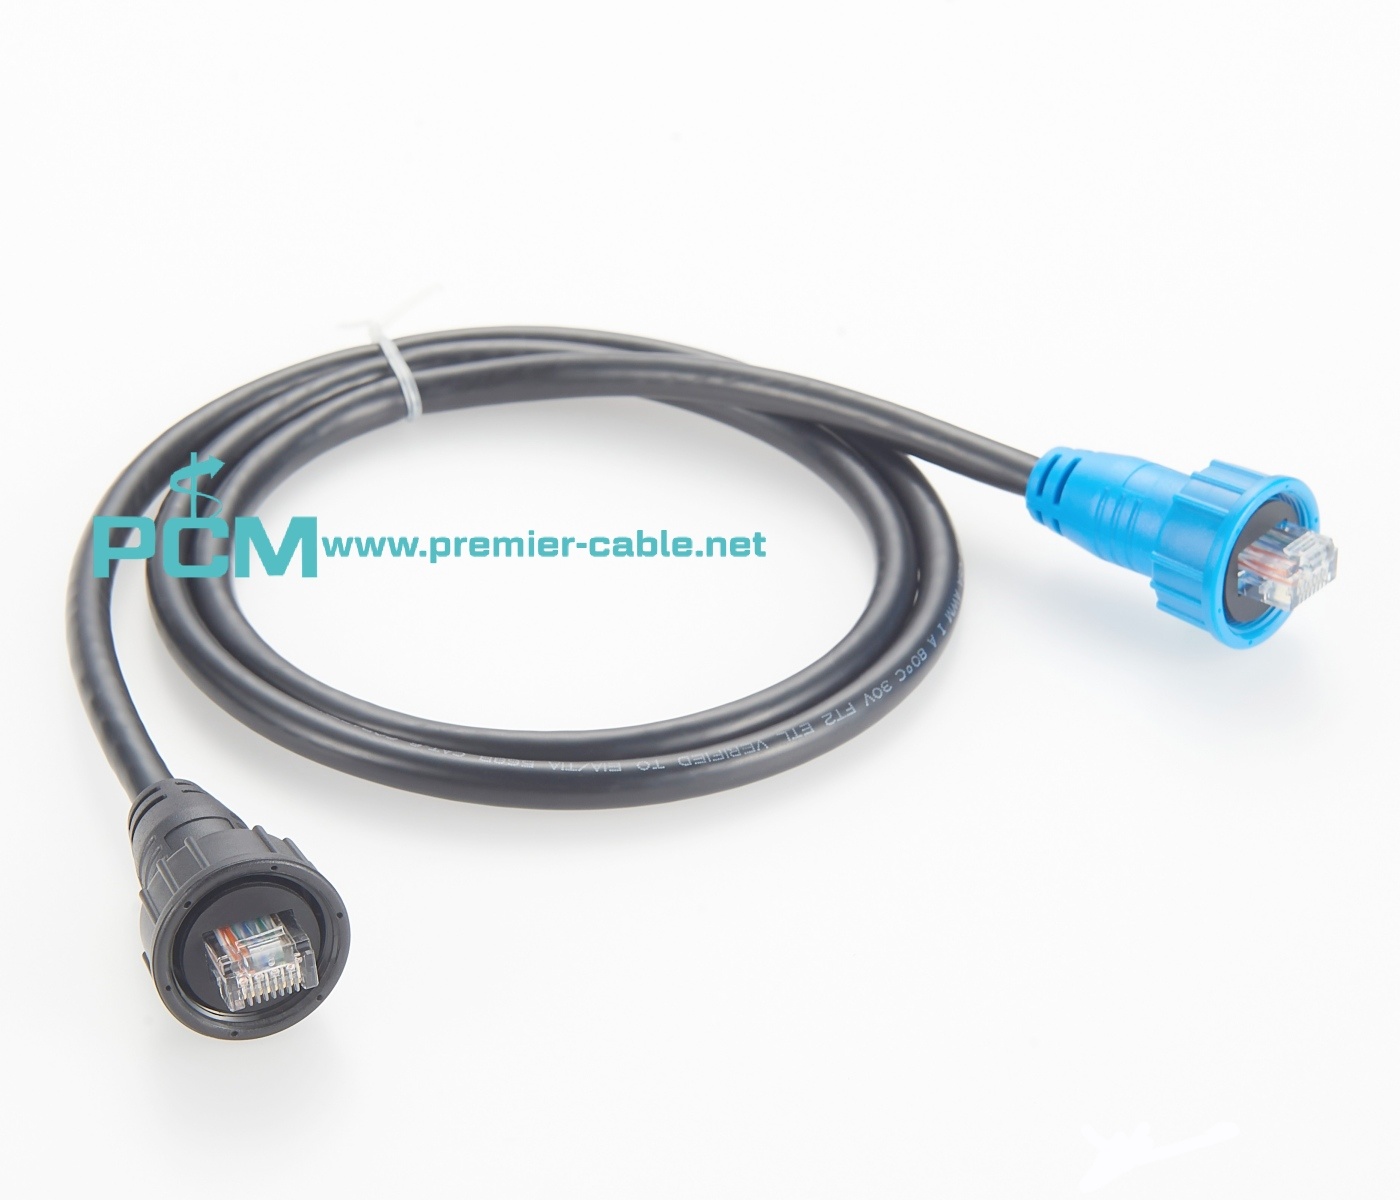 Premier Cable Shadow-Caster Garmin Ethernet marine network cable